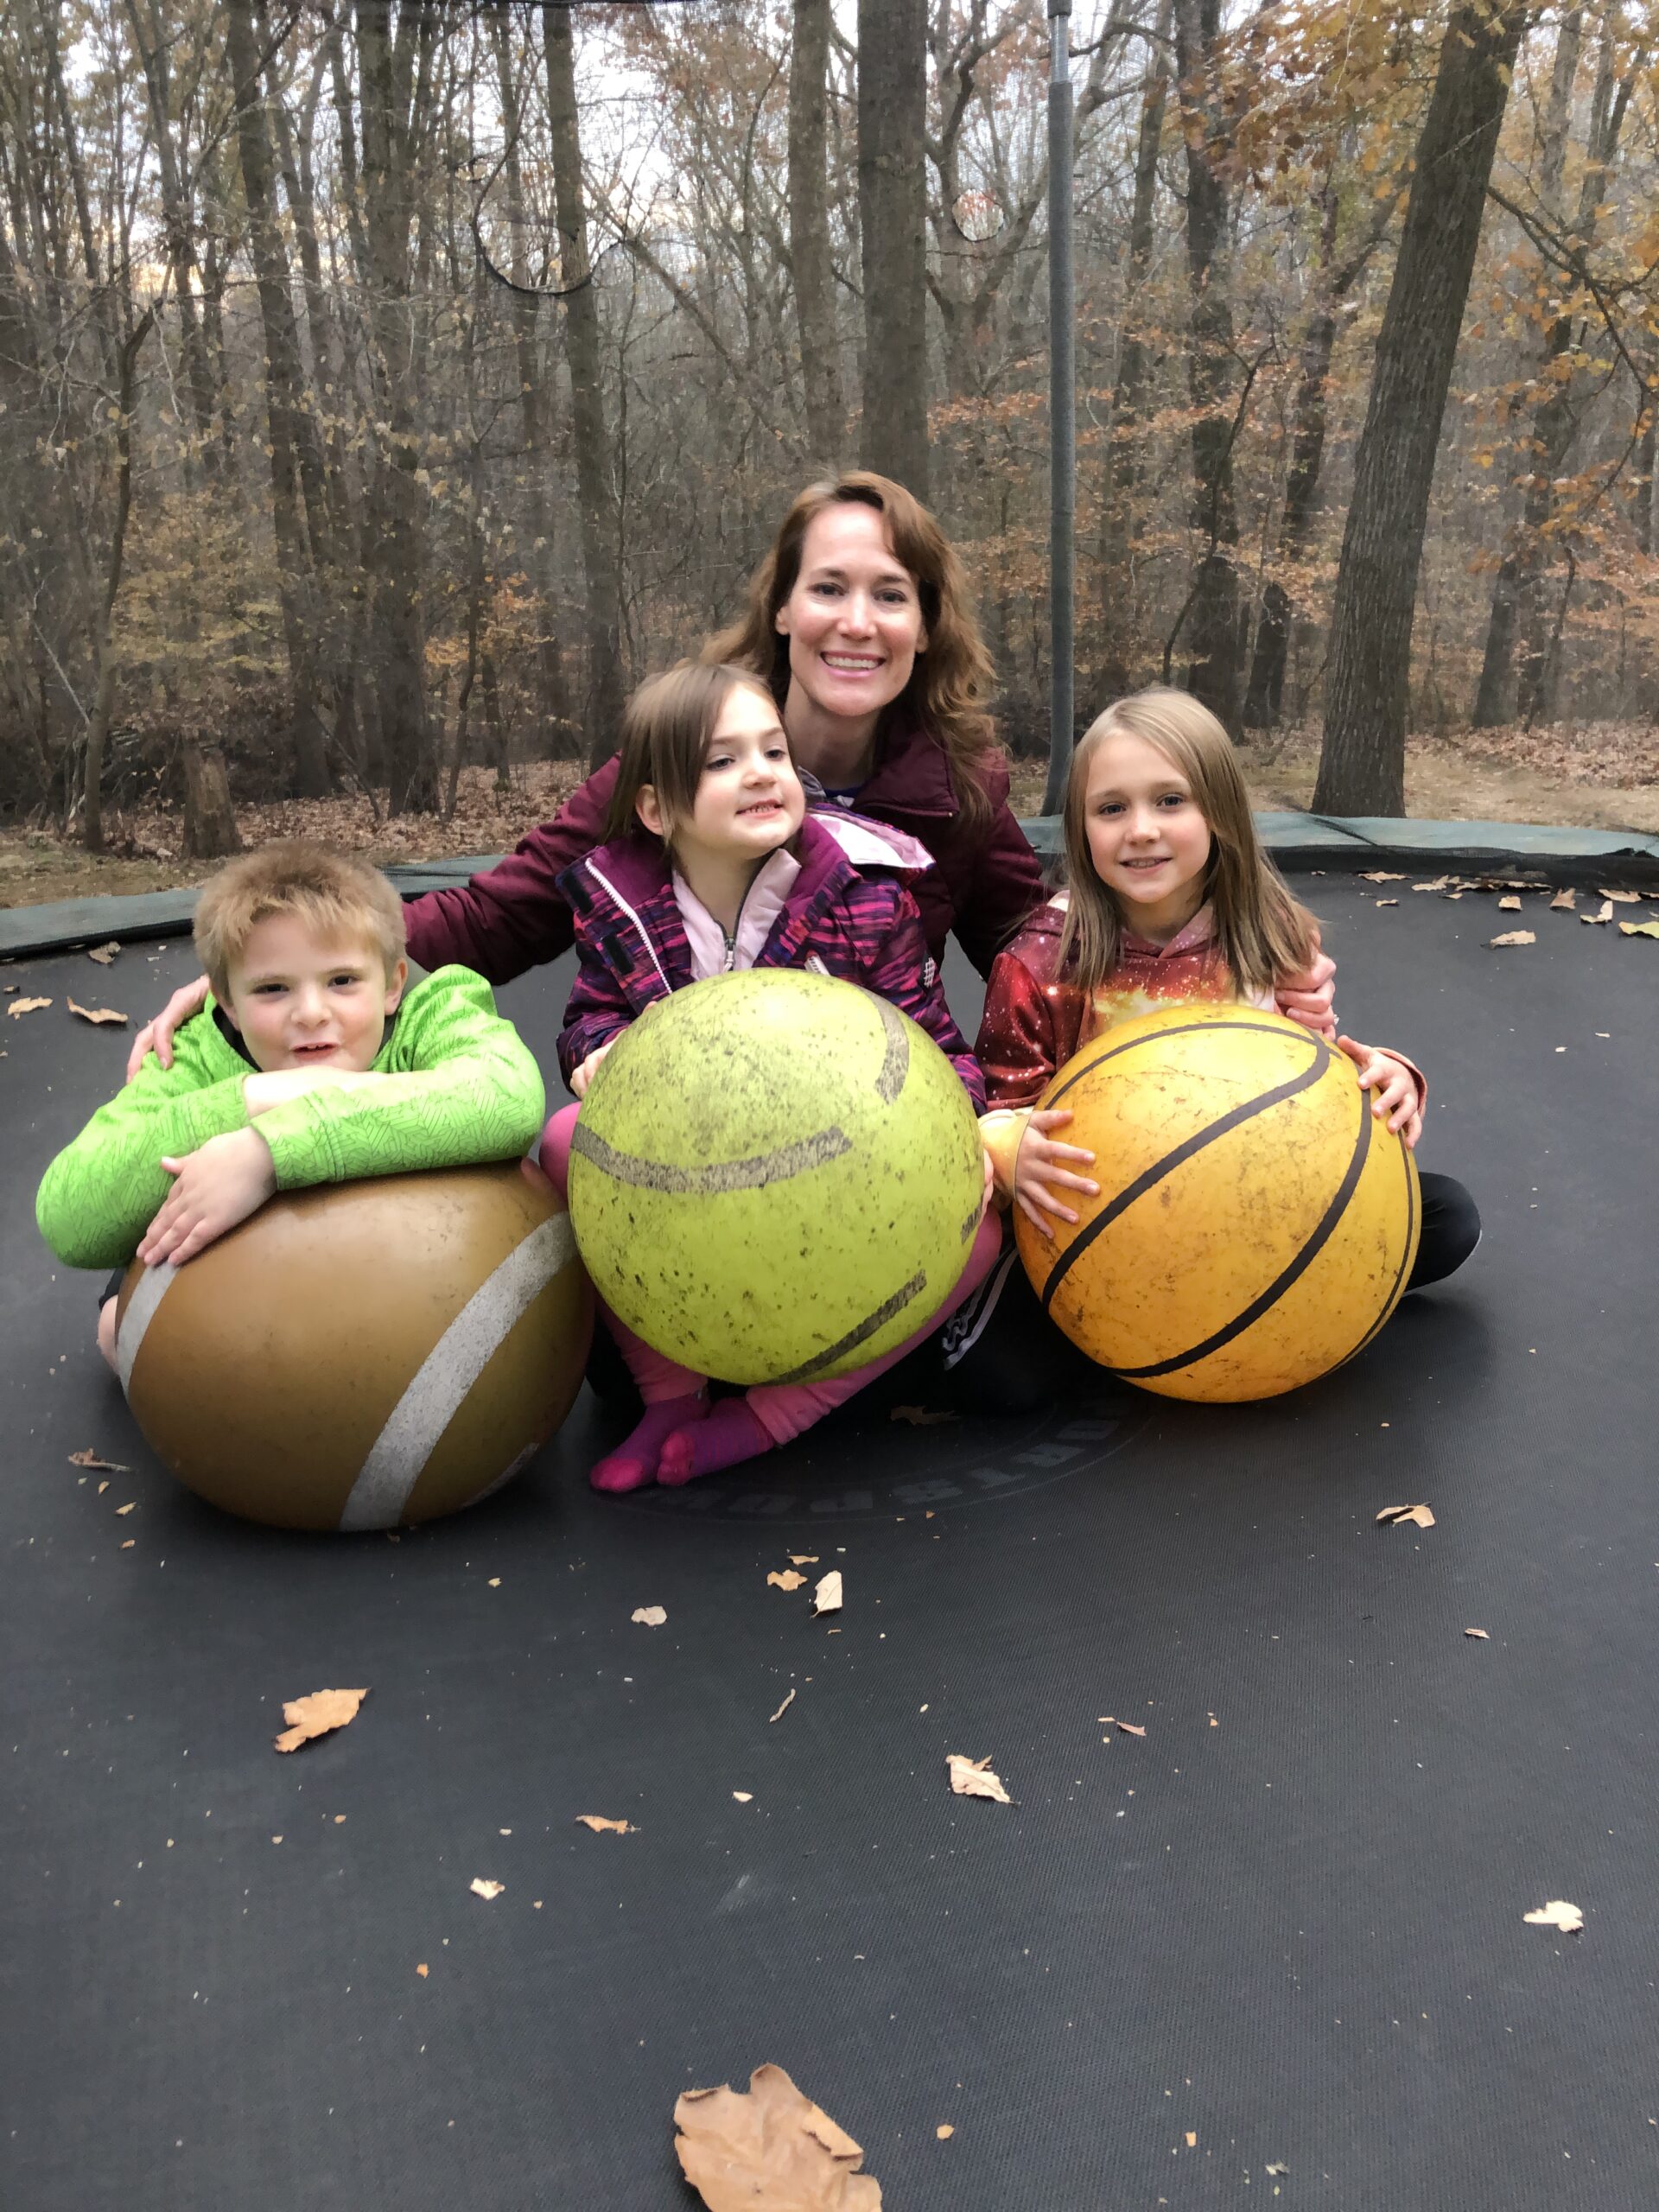 Christy Brunke on the trampoline with her daughters